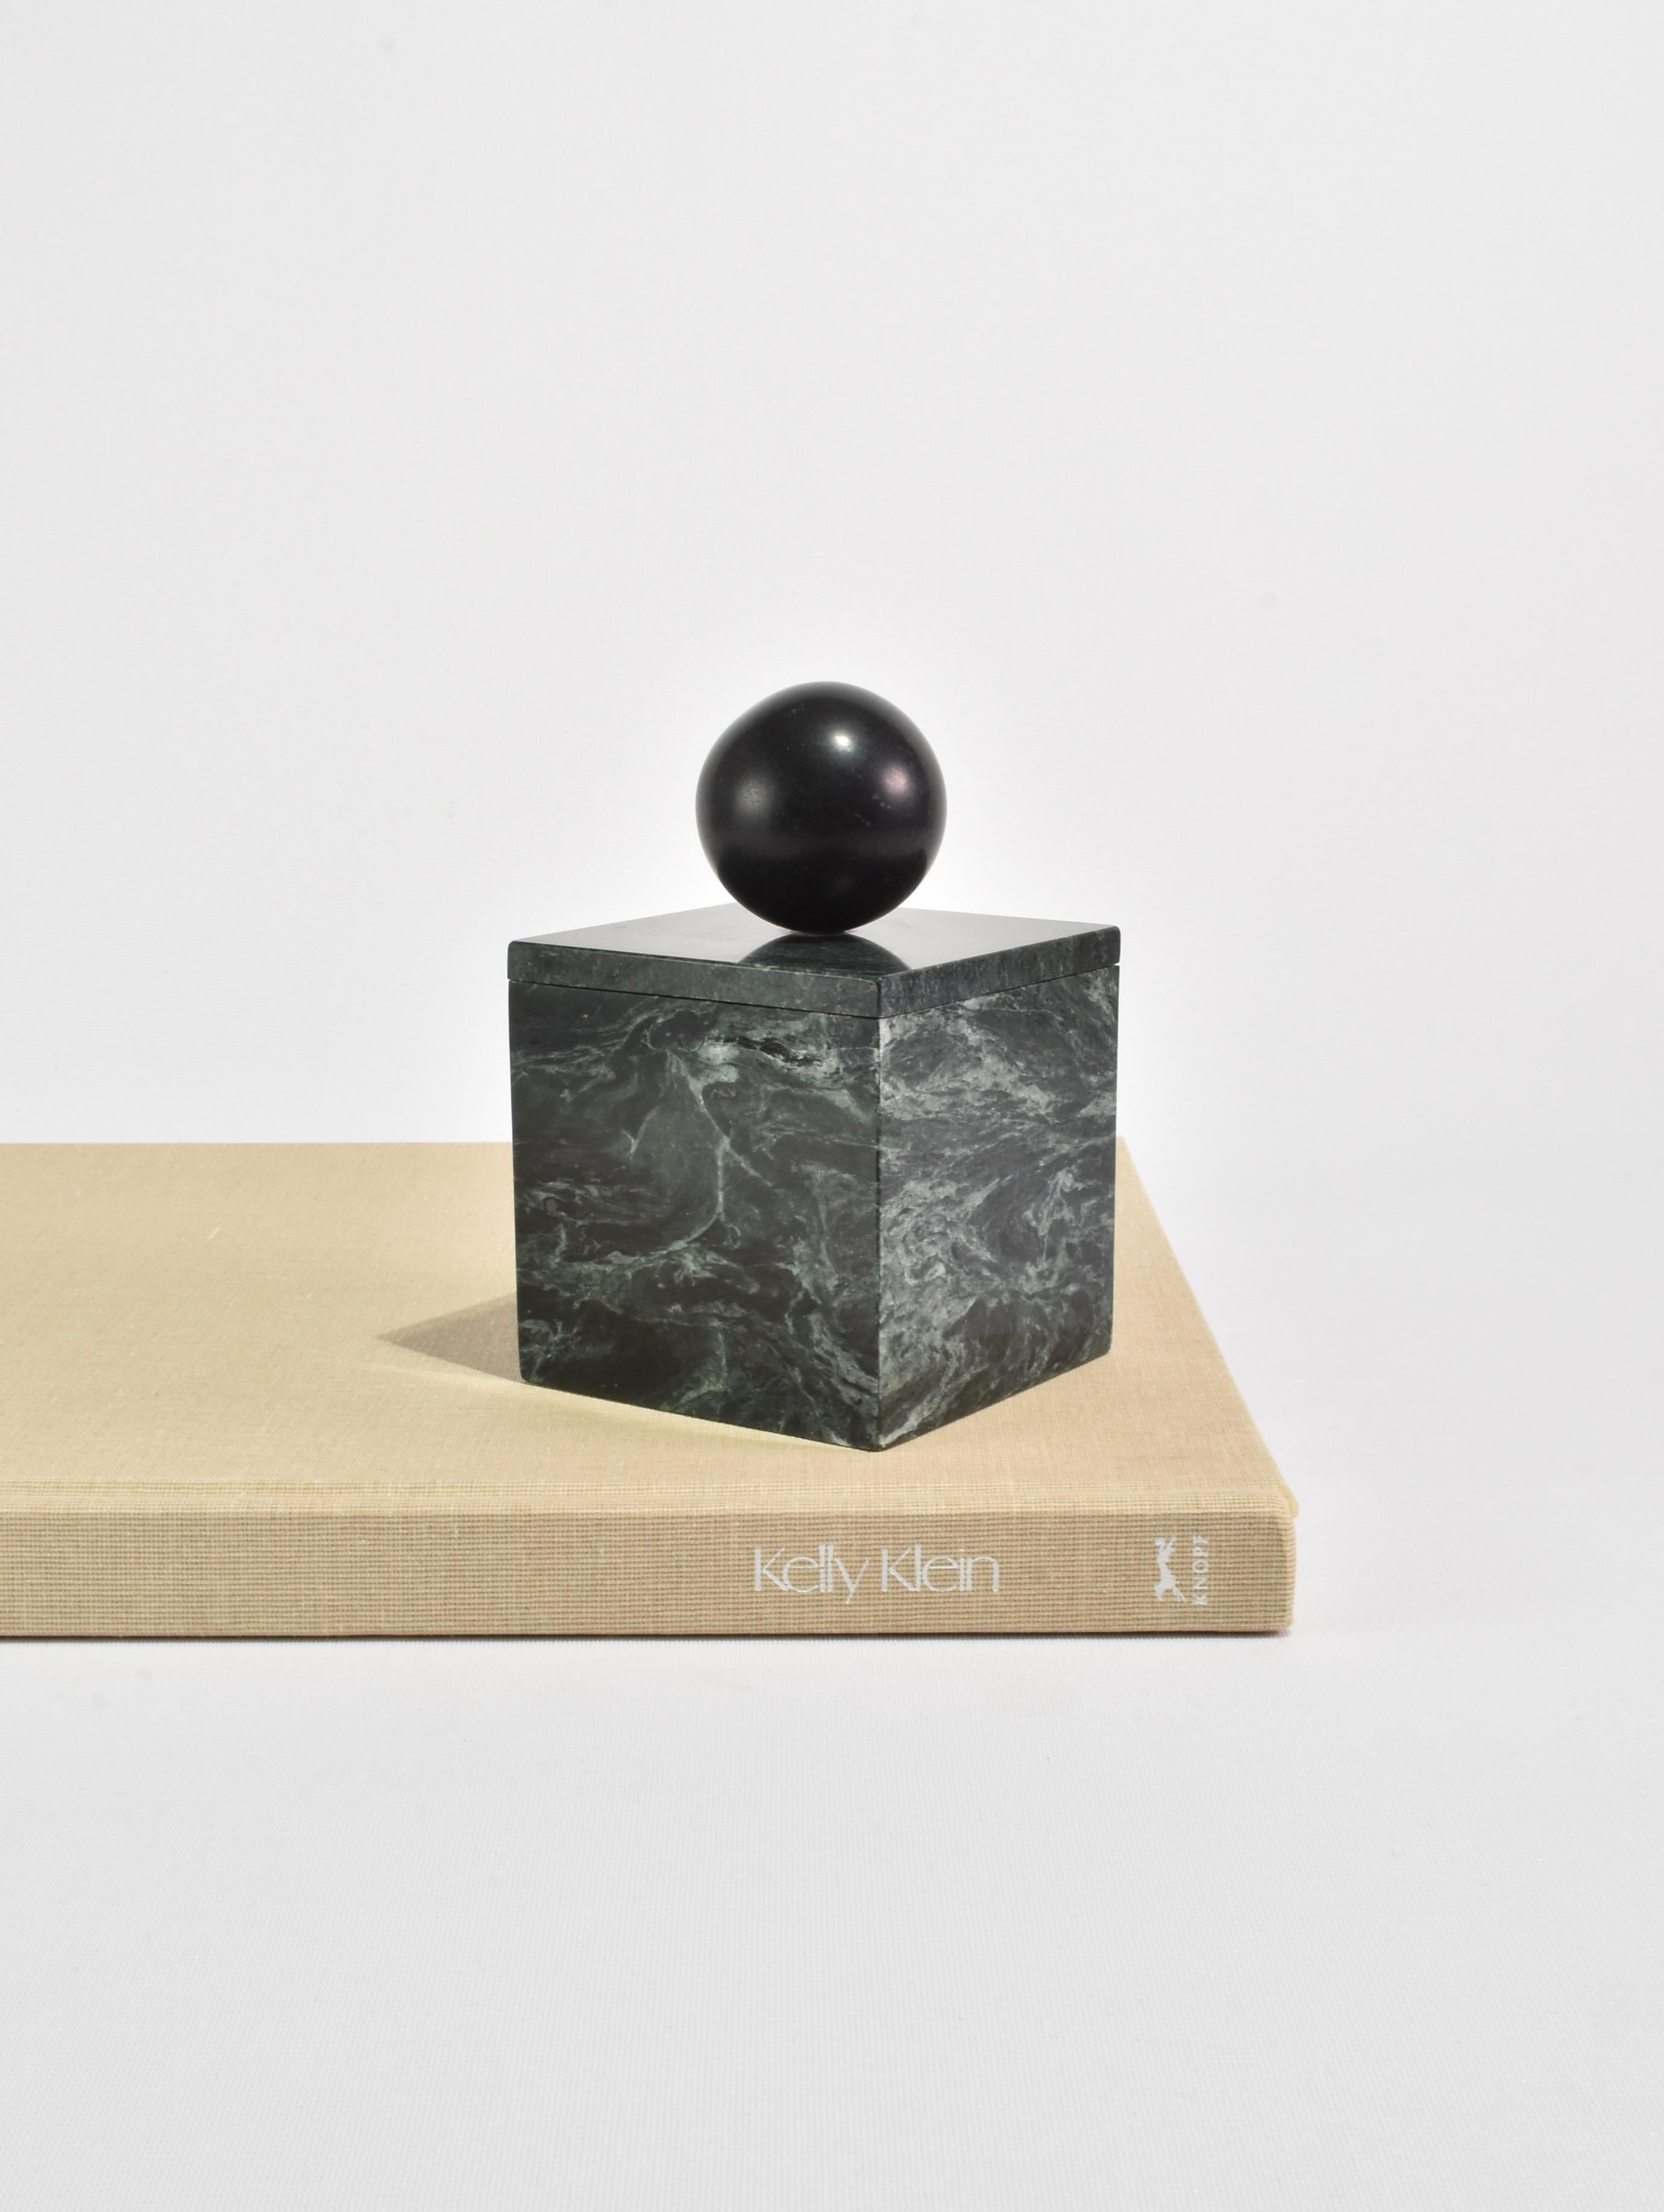 The Curio Box by Casa Shop in Green Marble with Black Onyx. Inspired by a favorite vintage find, each box features a square base with a sphere handle. Handmade by artisans in India.

Use it to hide away an array of items – a rare collection of